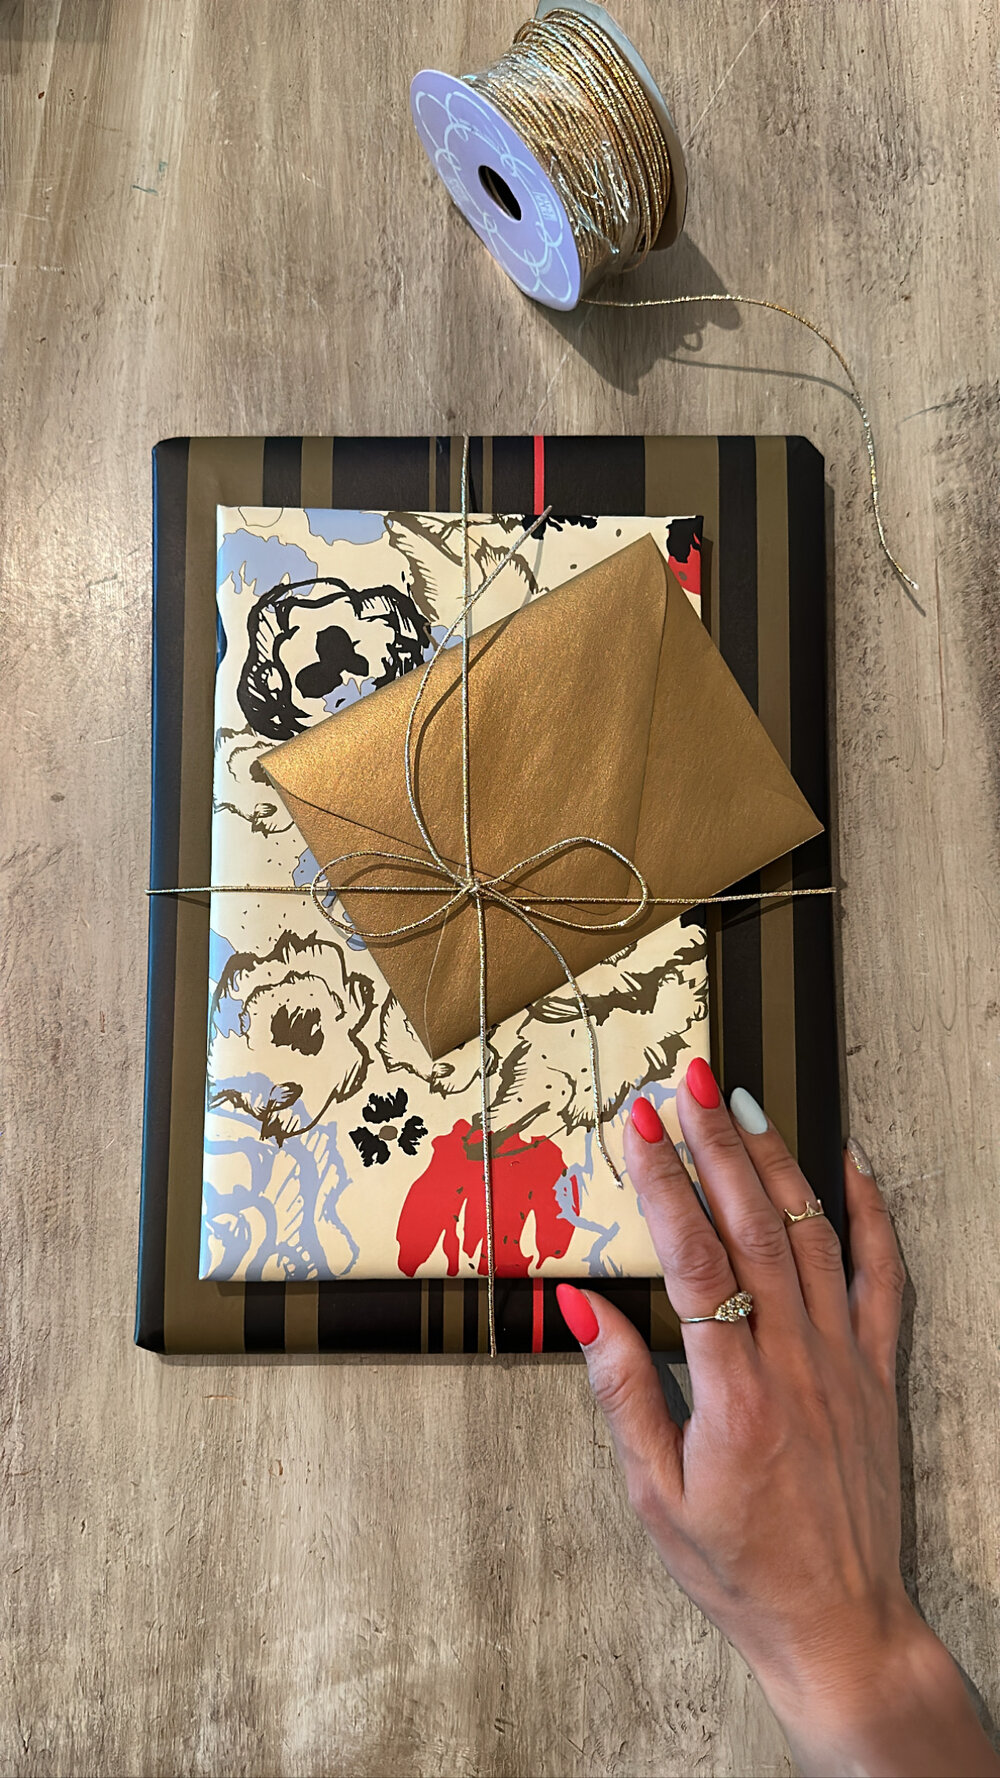 Creative Kraft Wrapping Paper Ideas - Design & Paper